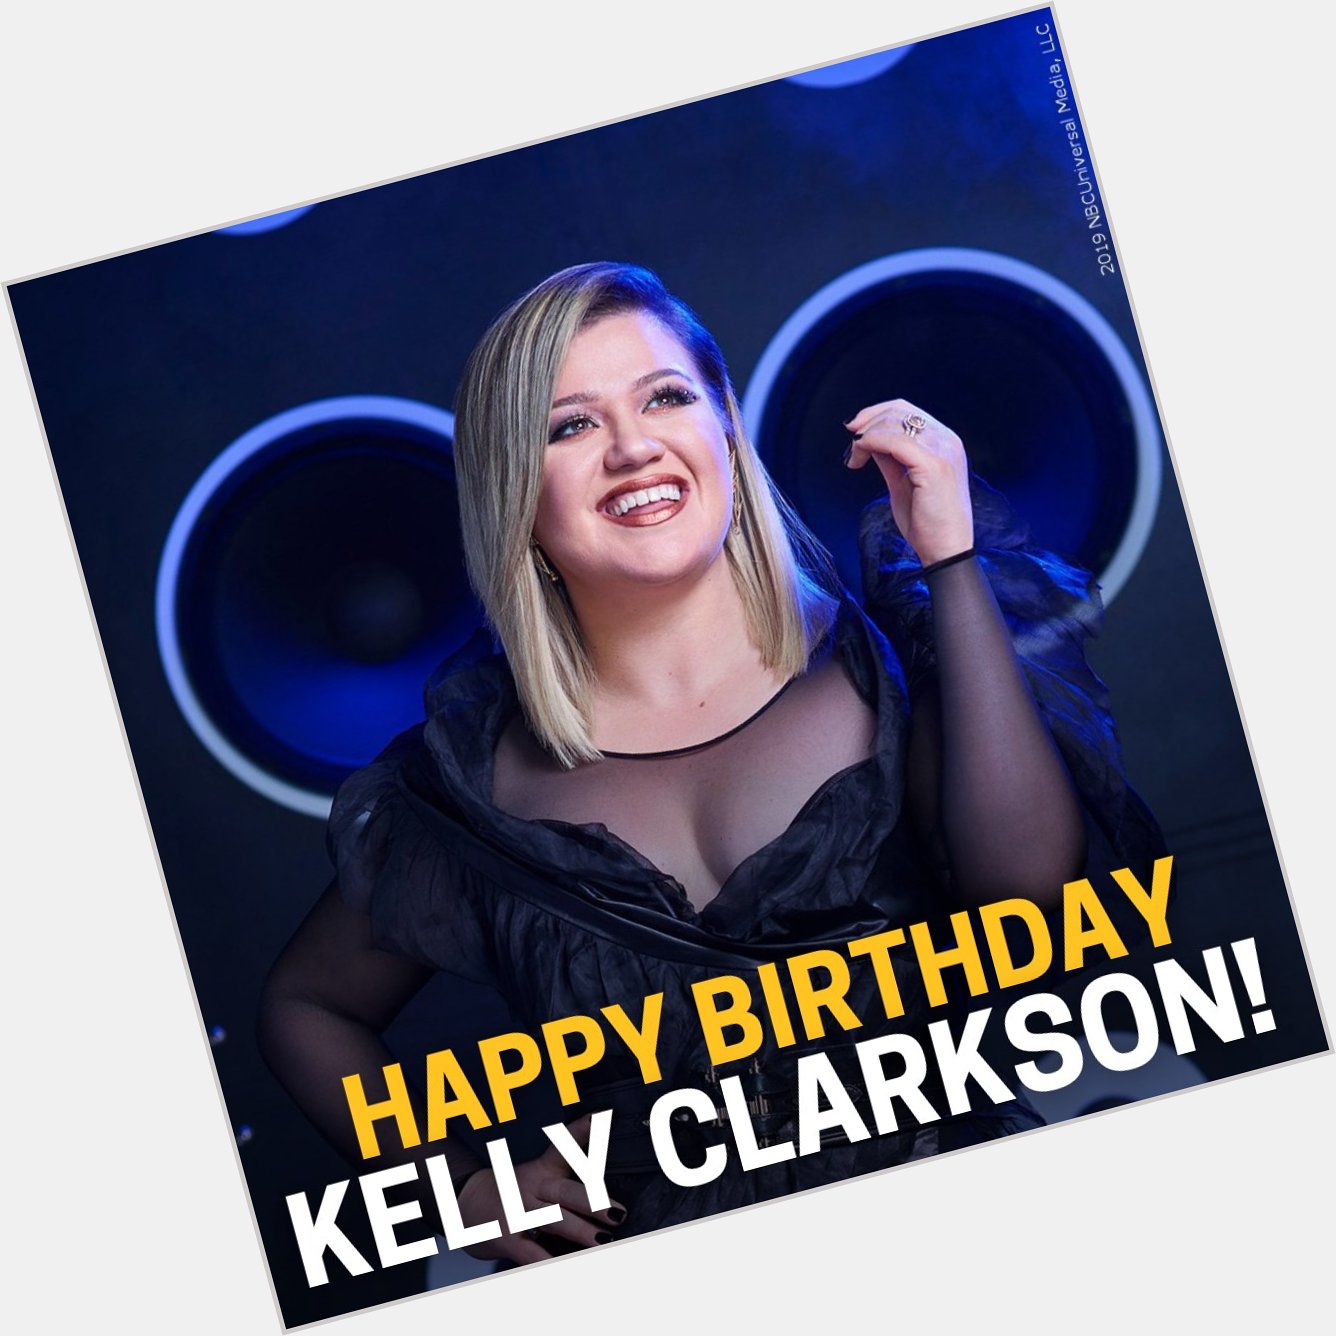 Happy birthday Kelly Clarkson! What is your favorite Kelly Clarkson song? 